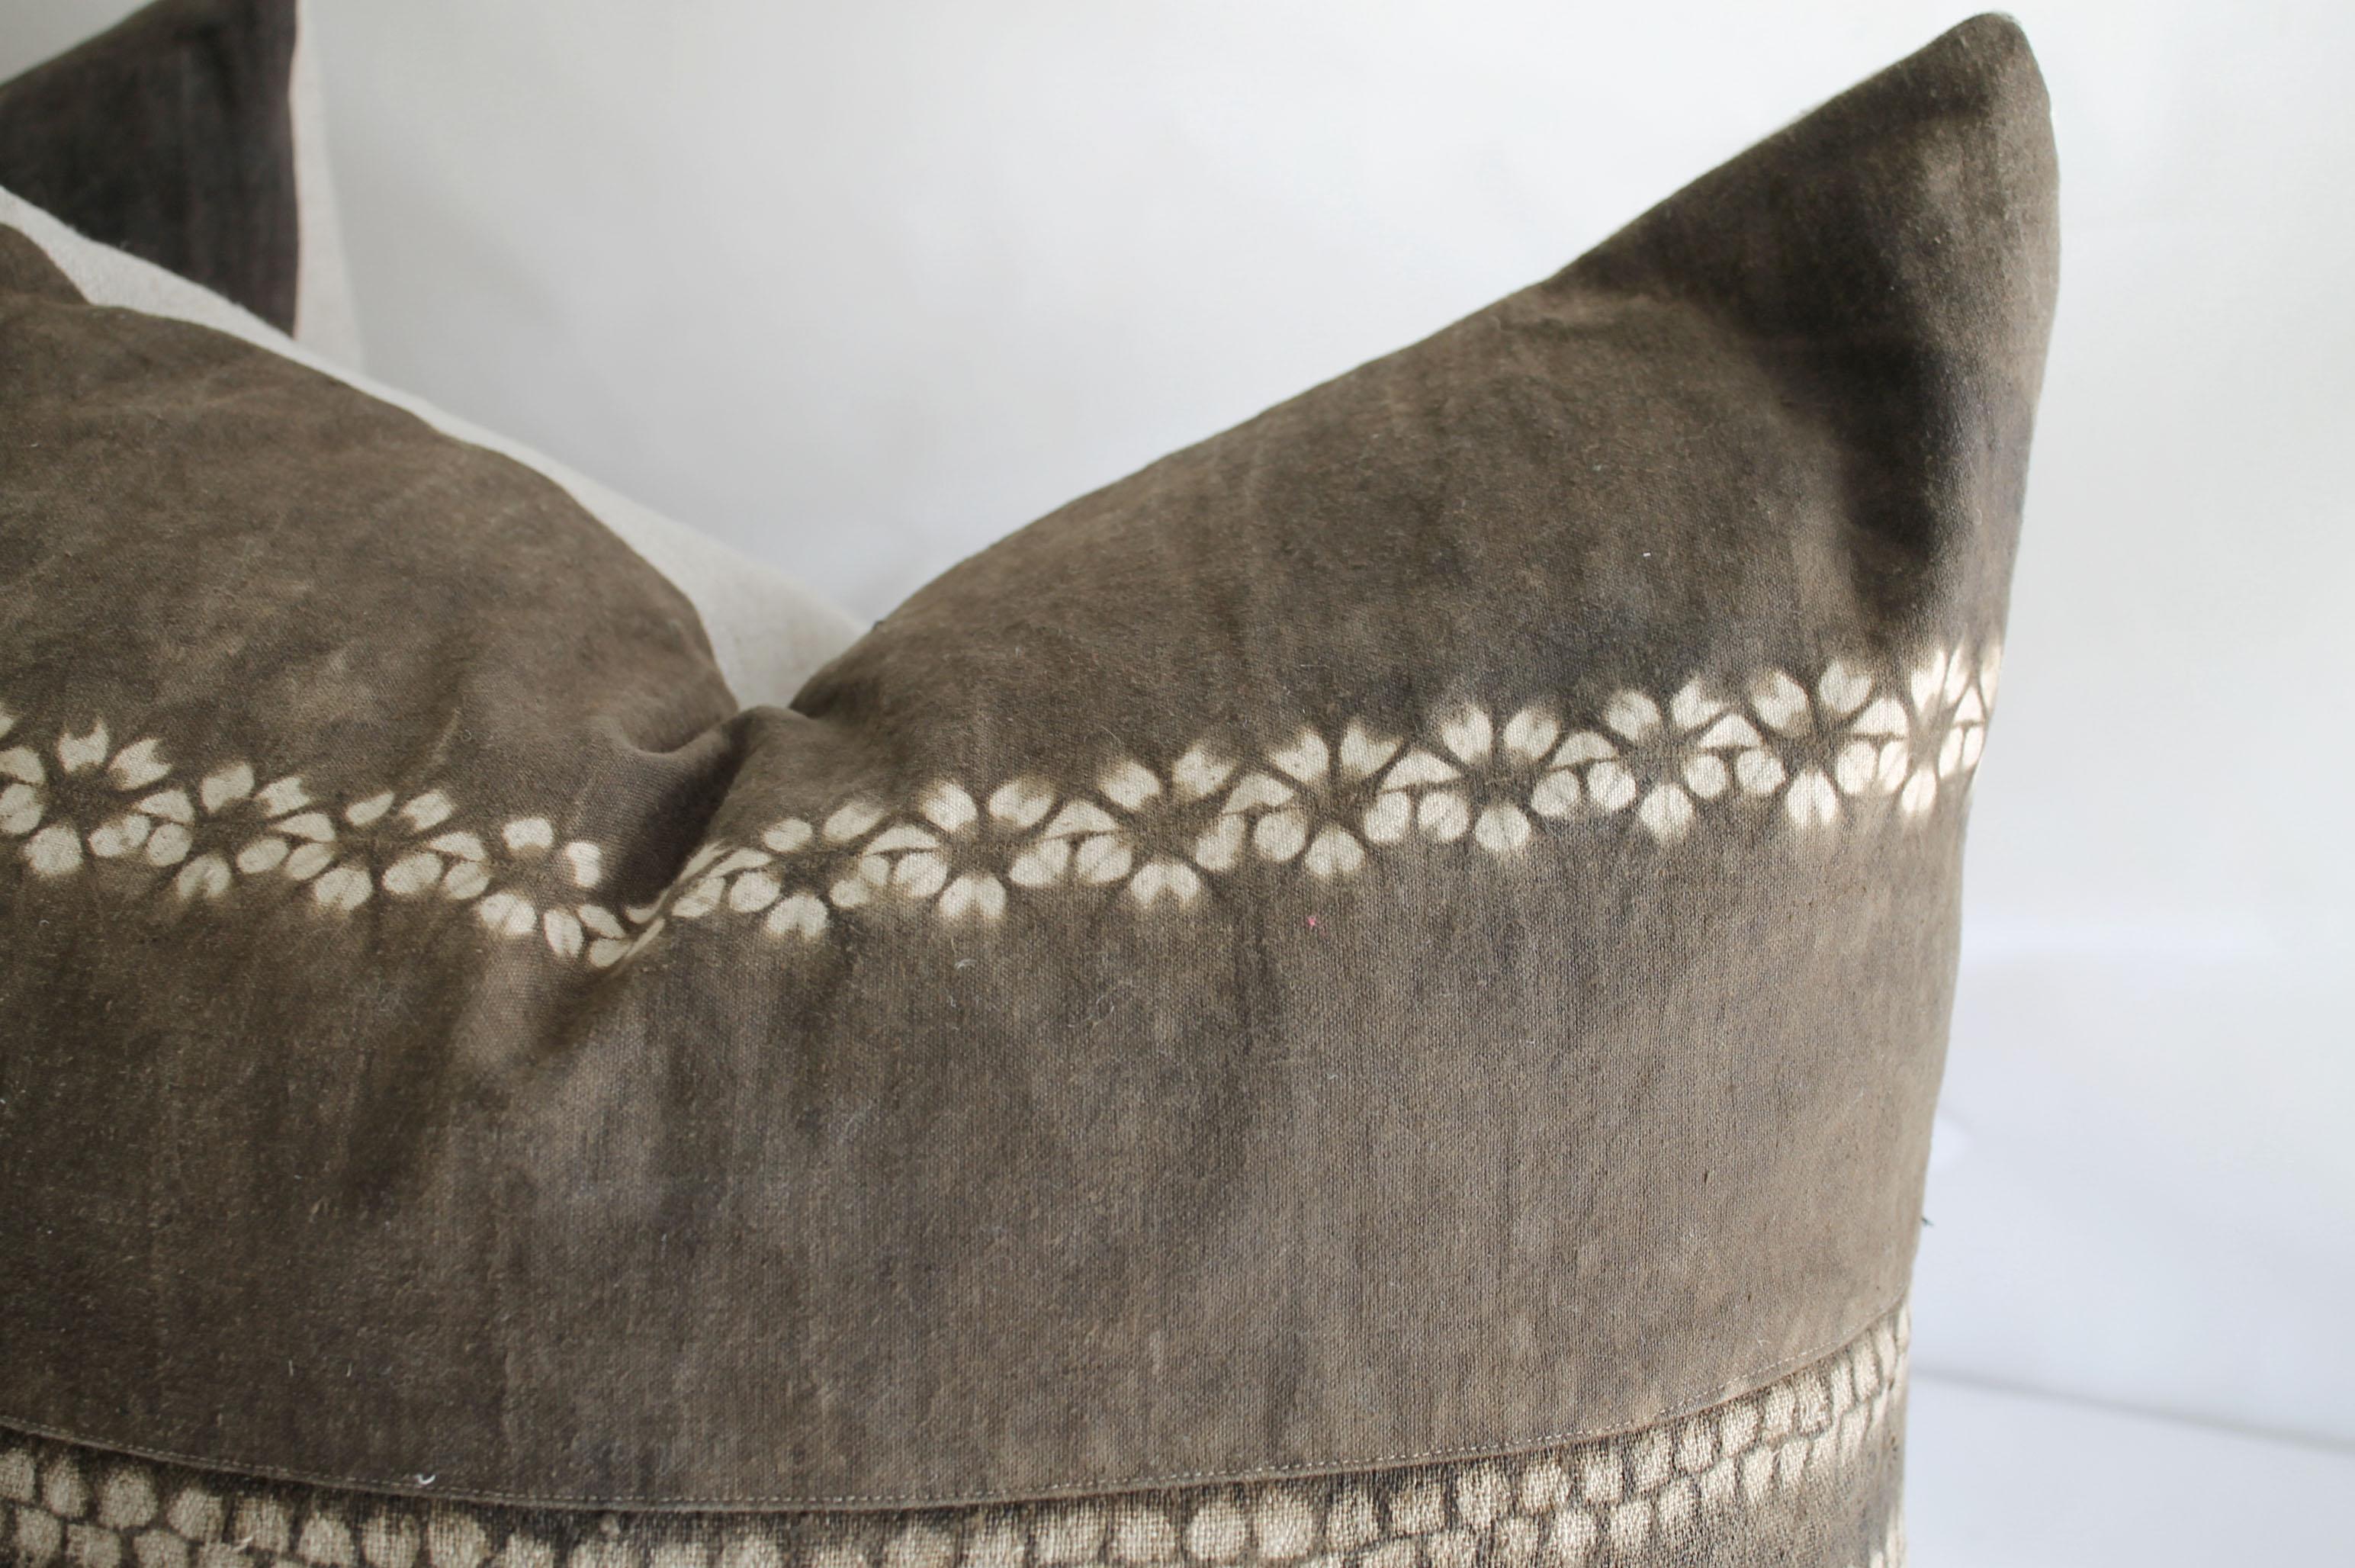 Vintage bleached batik textile lumbar pillow beautiful faded brown batik with light natural linen colored pattern dots horizontally across the face. The backside is a natural Belgian linen, with hidden zipper closure. No insert is